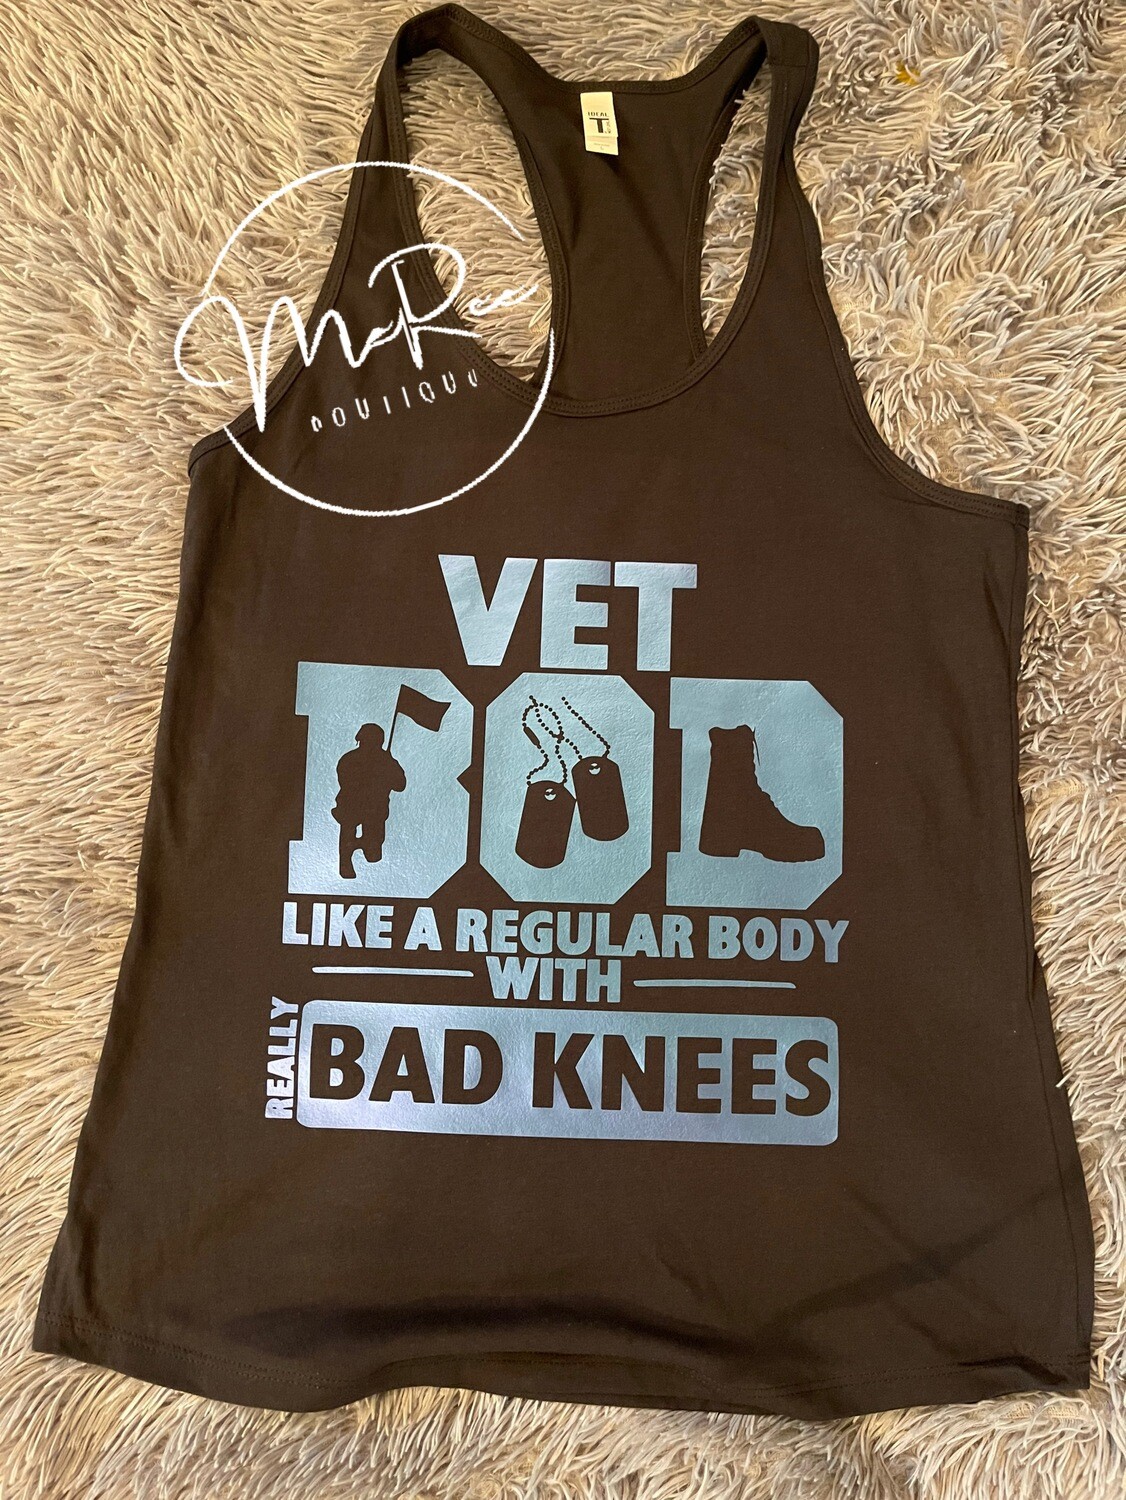 Woman’s Vet BOD Racerback Tank (please allow 3-5 days to process, once ordered.)